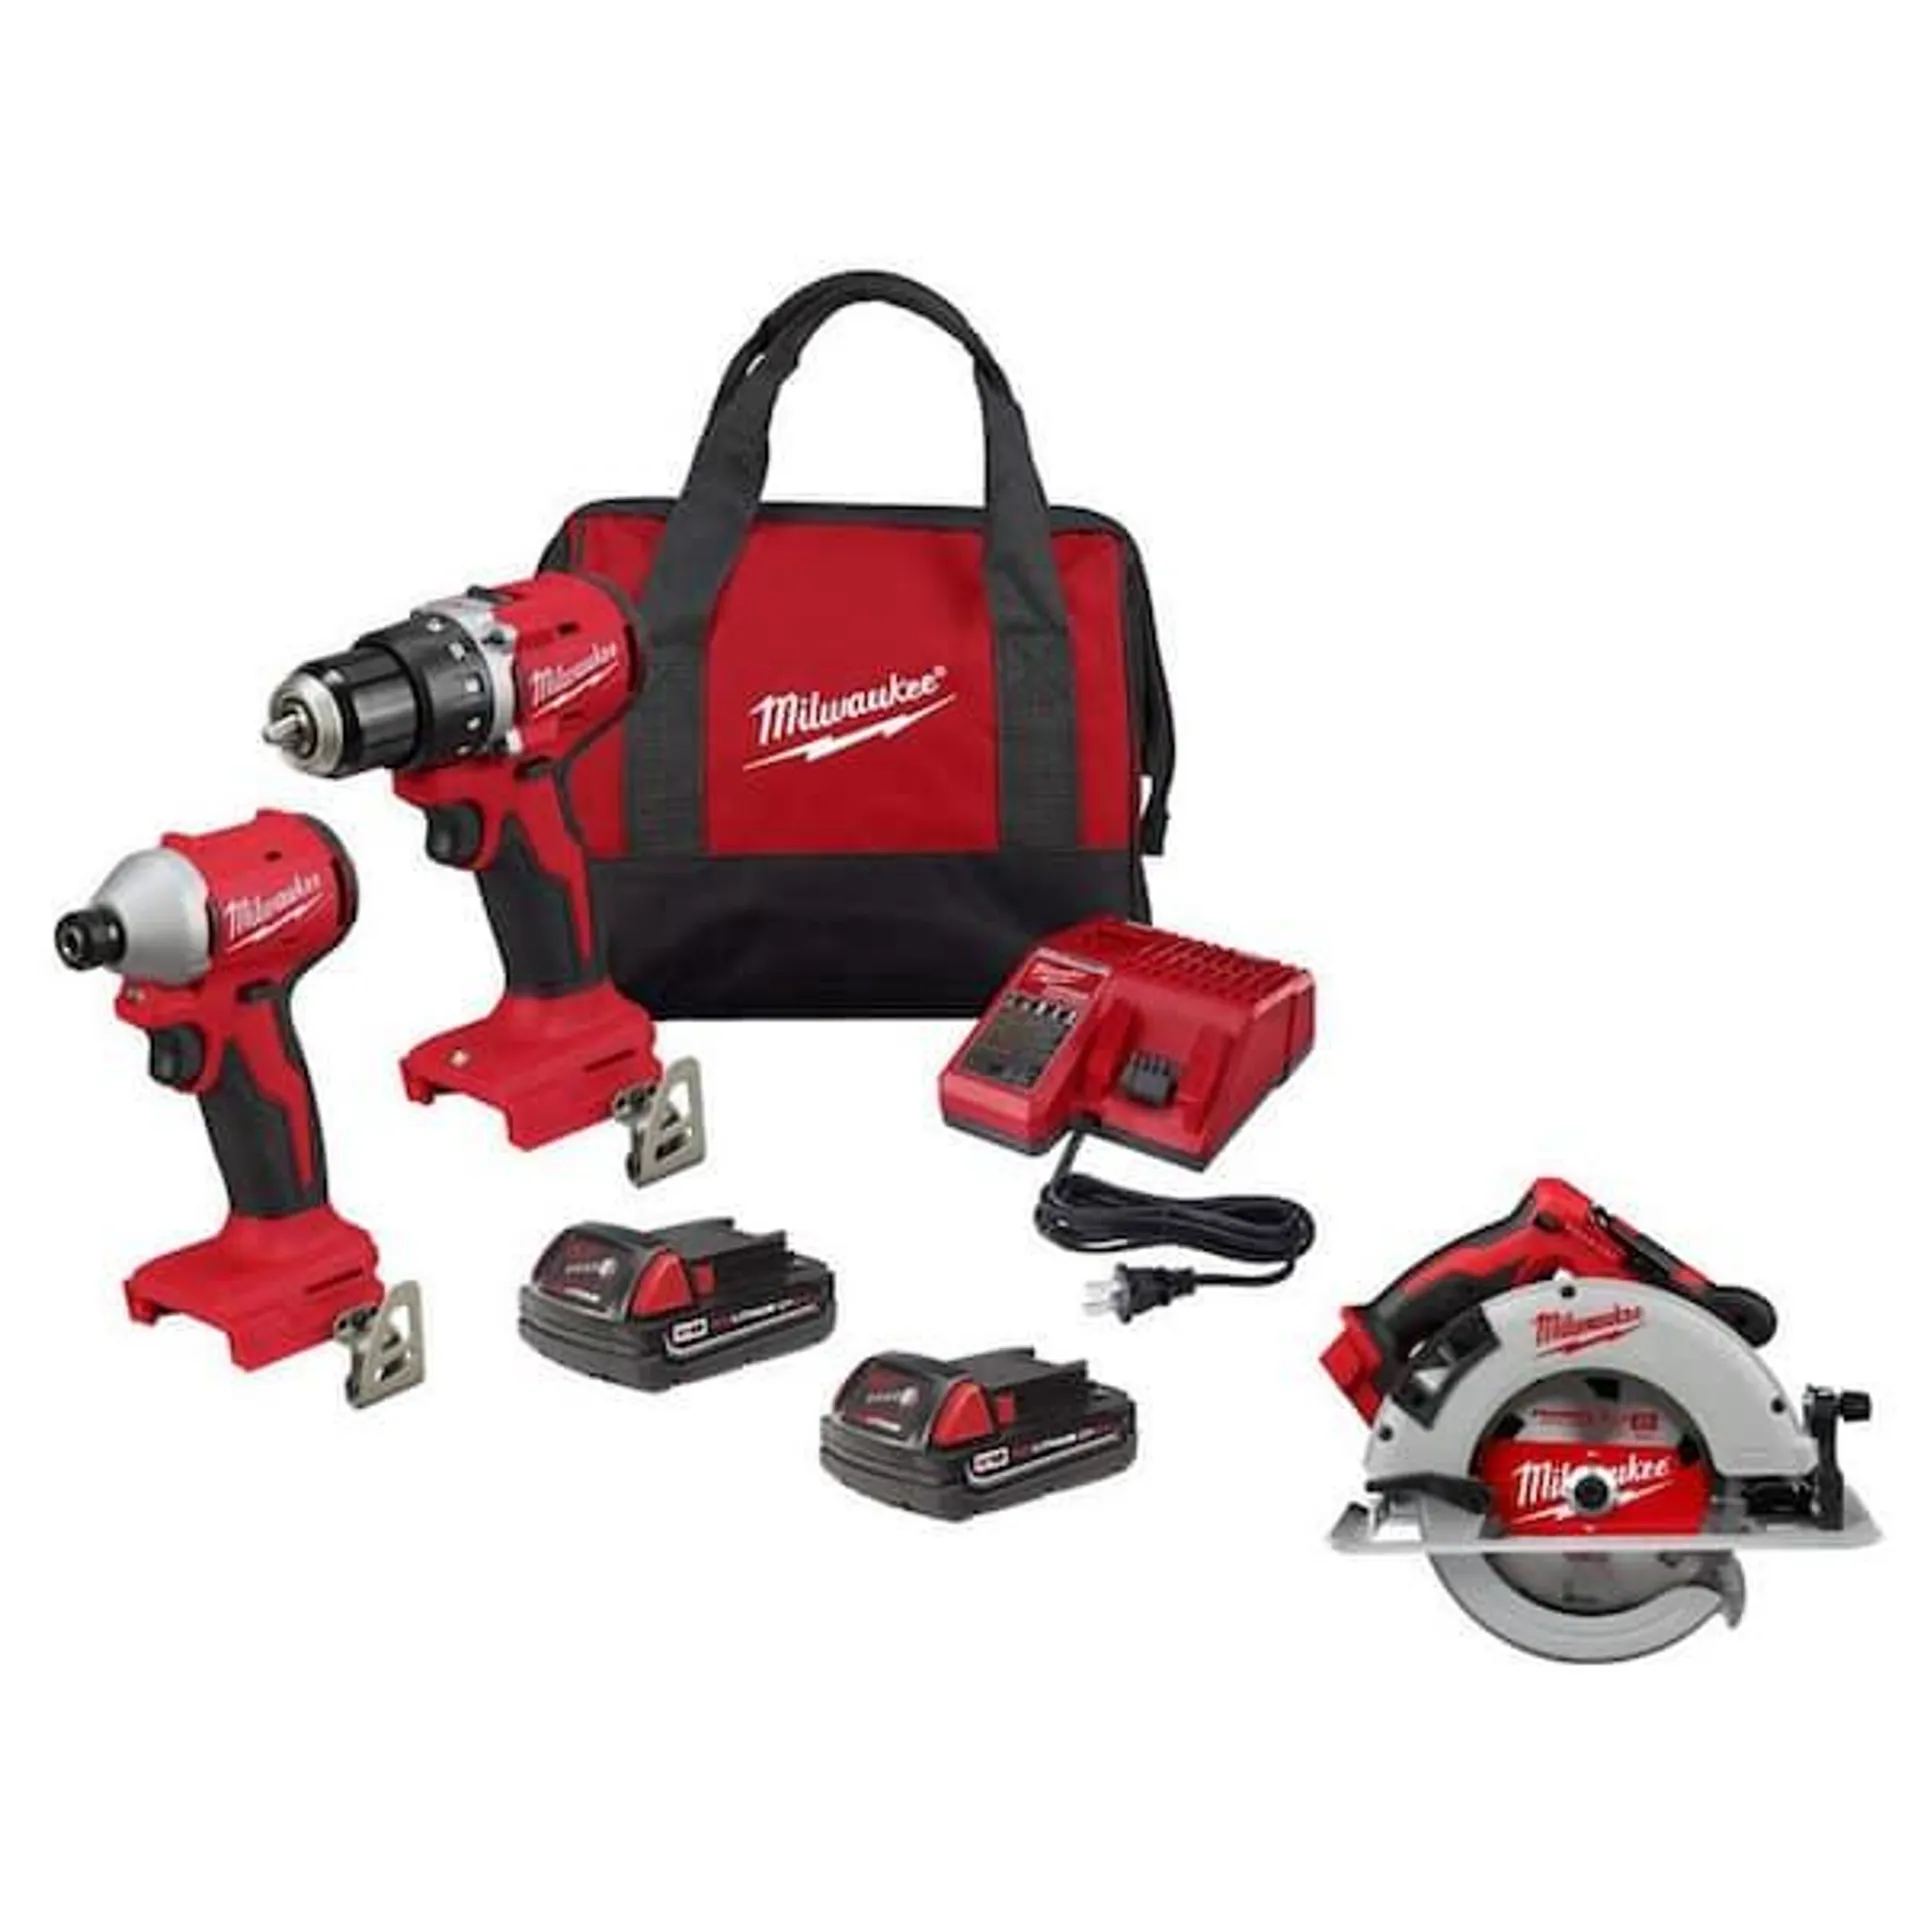 M18 18V Lithium-Ion Brushless Cordless Compact Drill/Impact Combo Kit (2-Tool) with Brushless 7-1/4 in. Circuar Saw